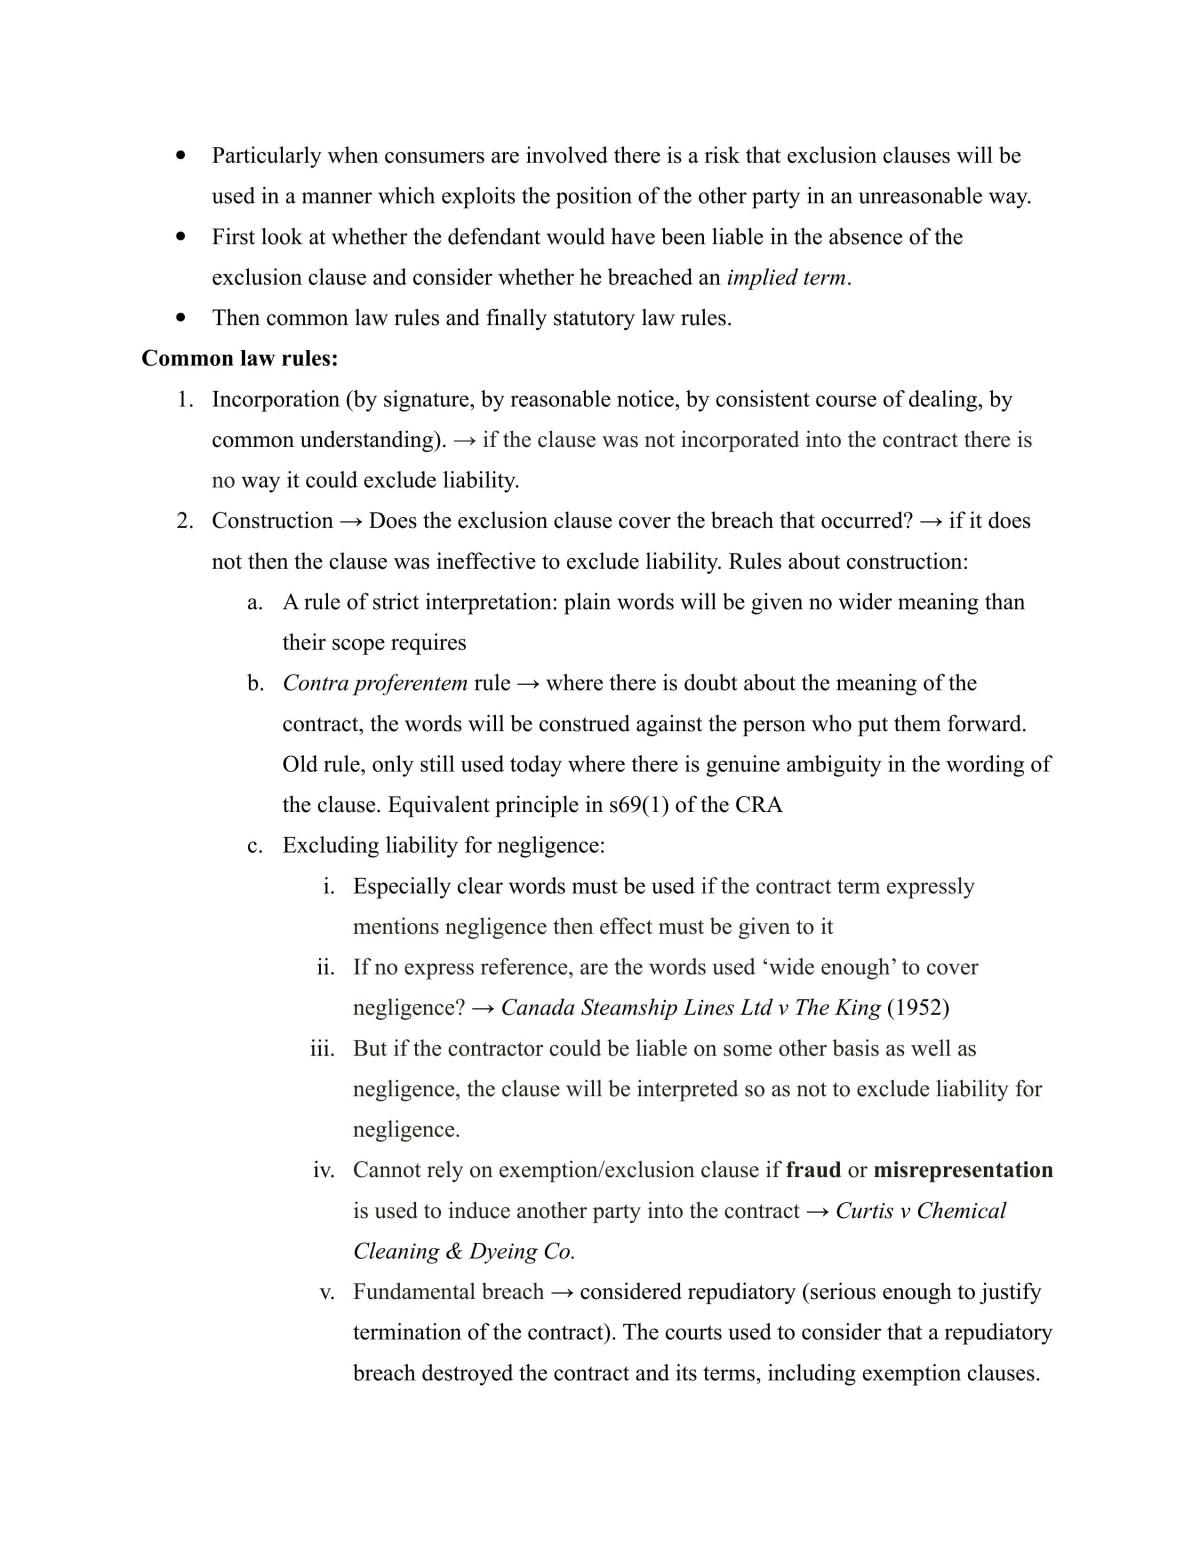 The Law of Contract Study Guide - Page 18